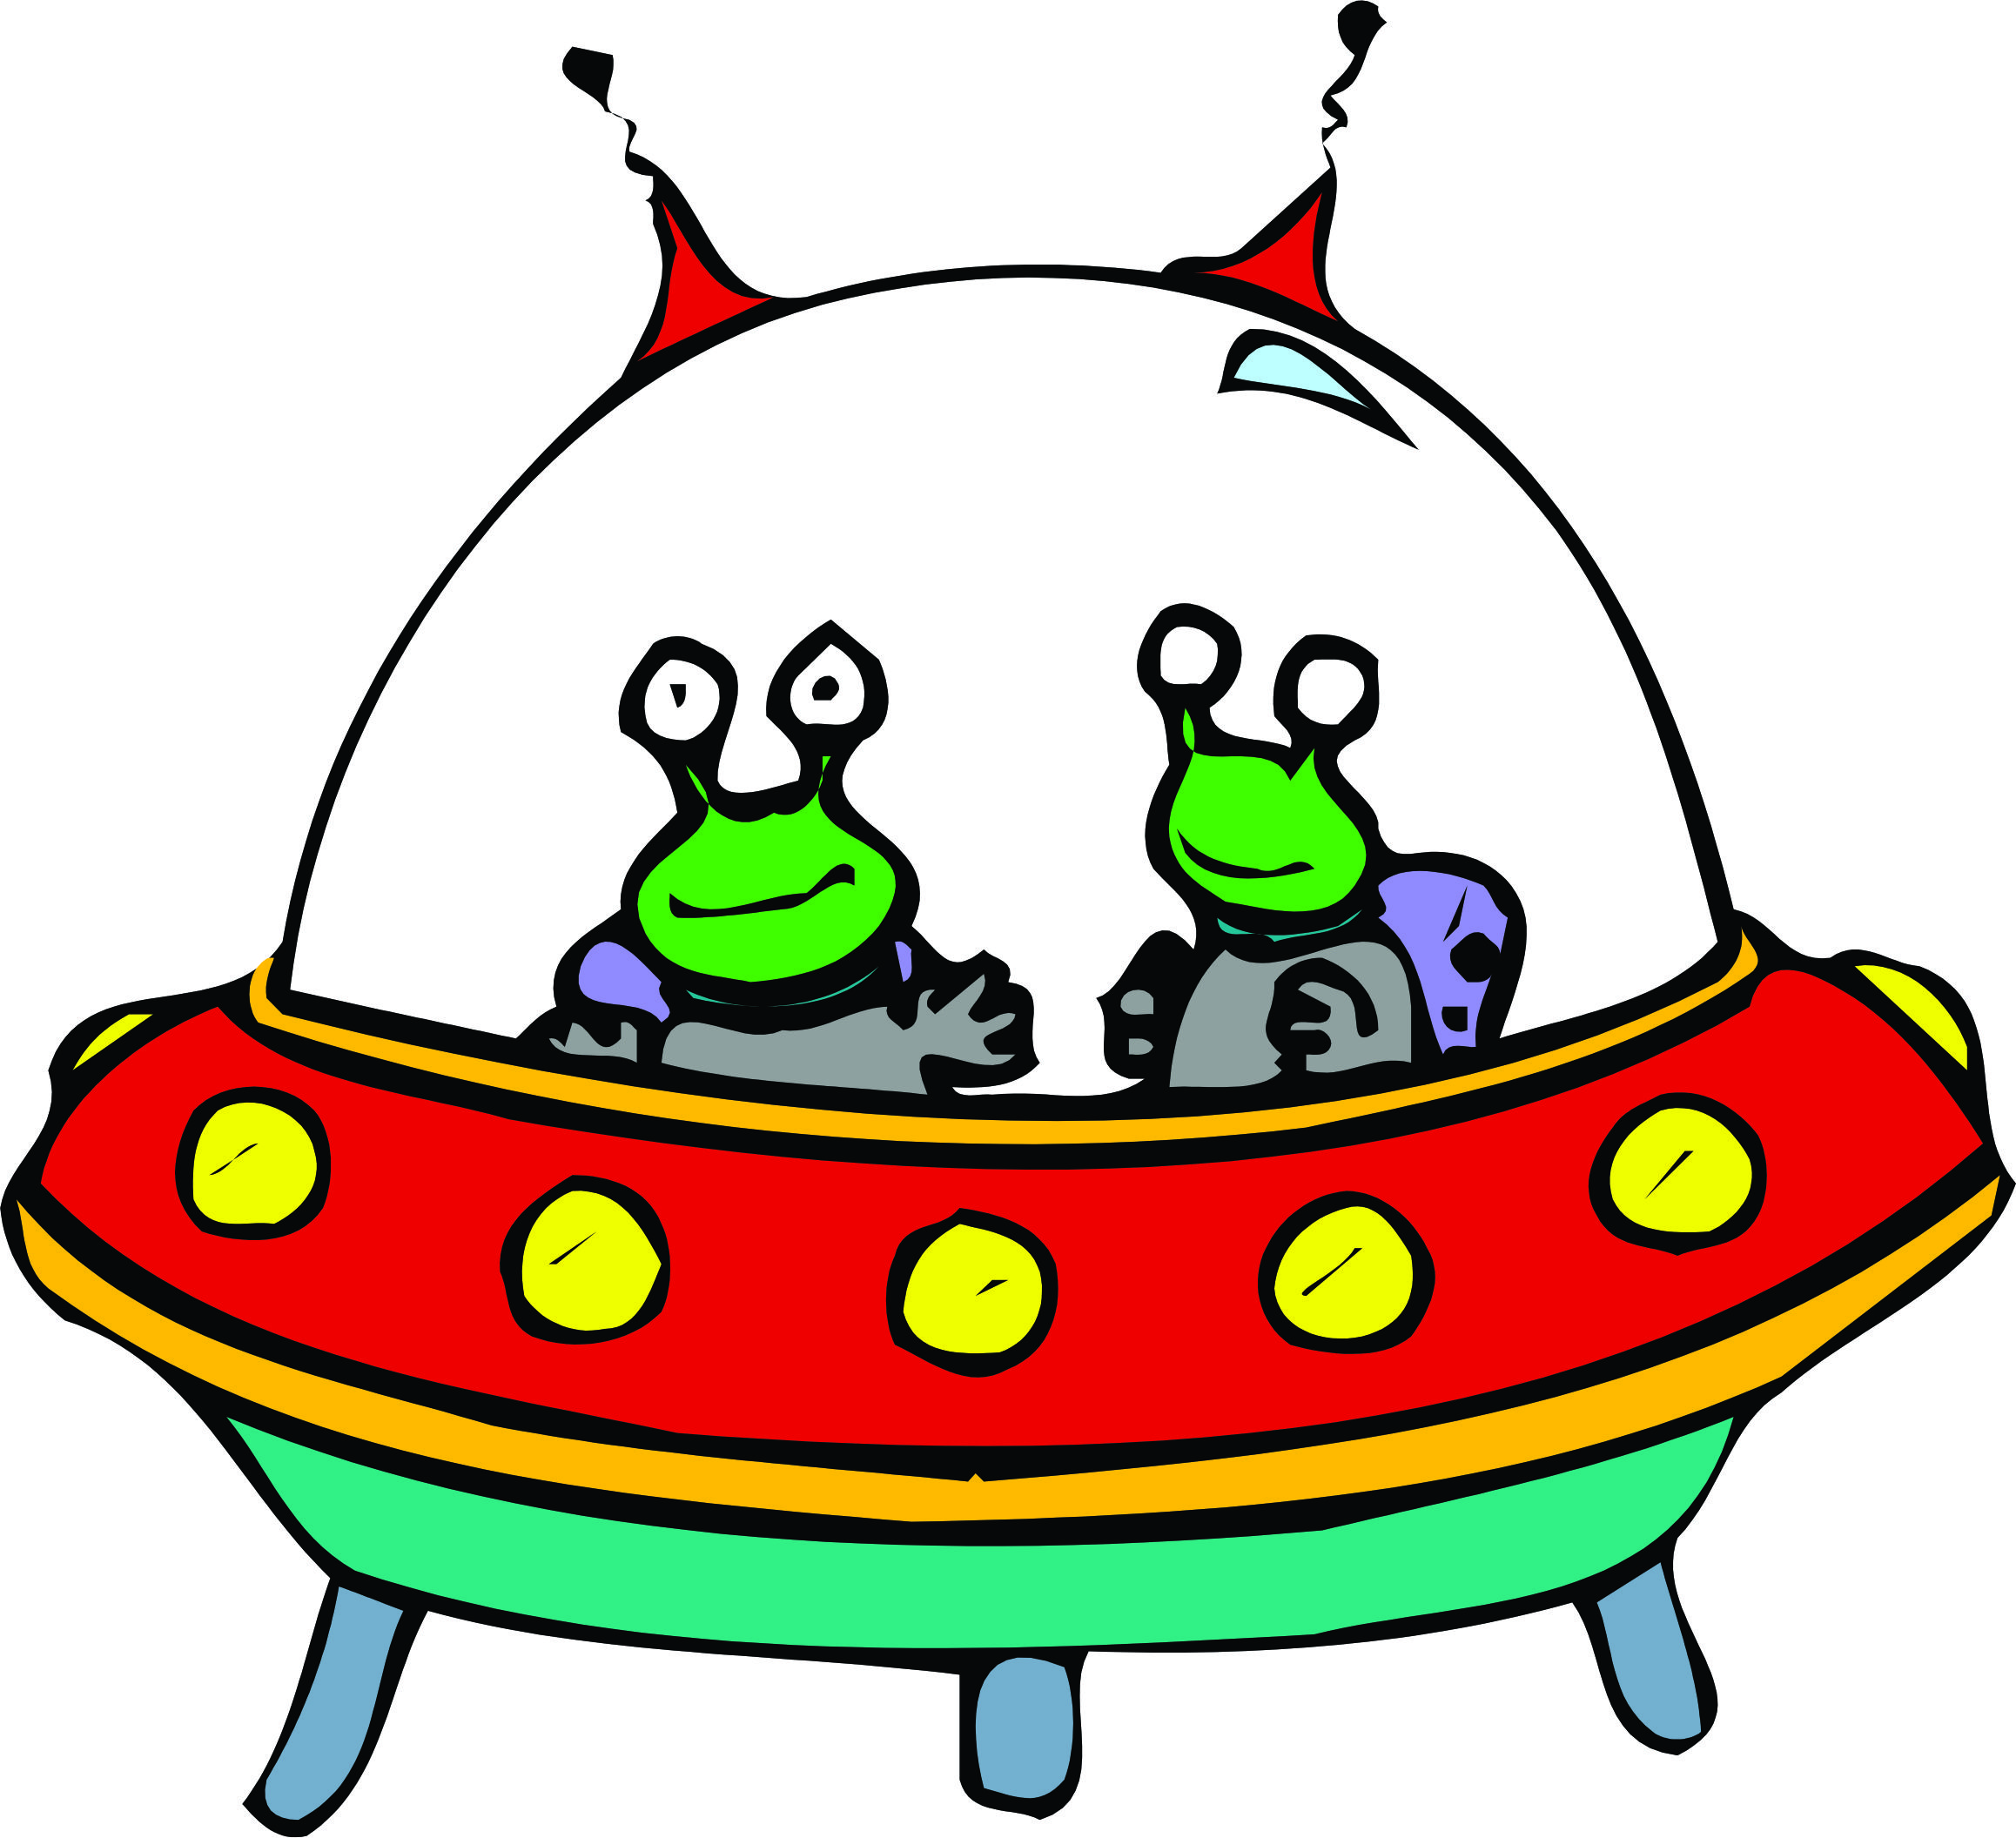 Alien Spaceship Cartoon In Space Images & Pictures - Becuo